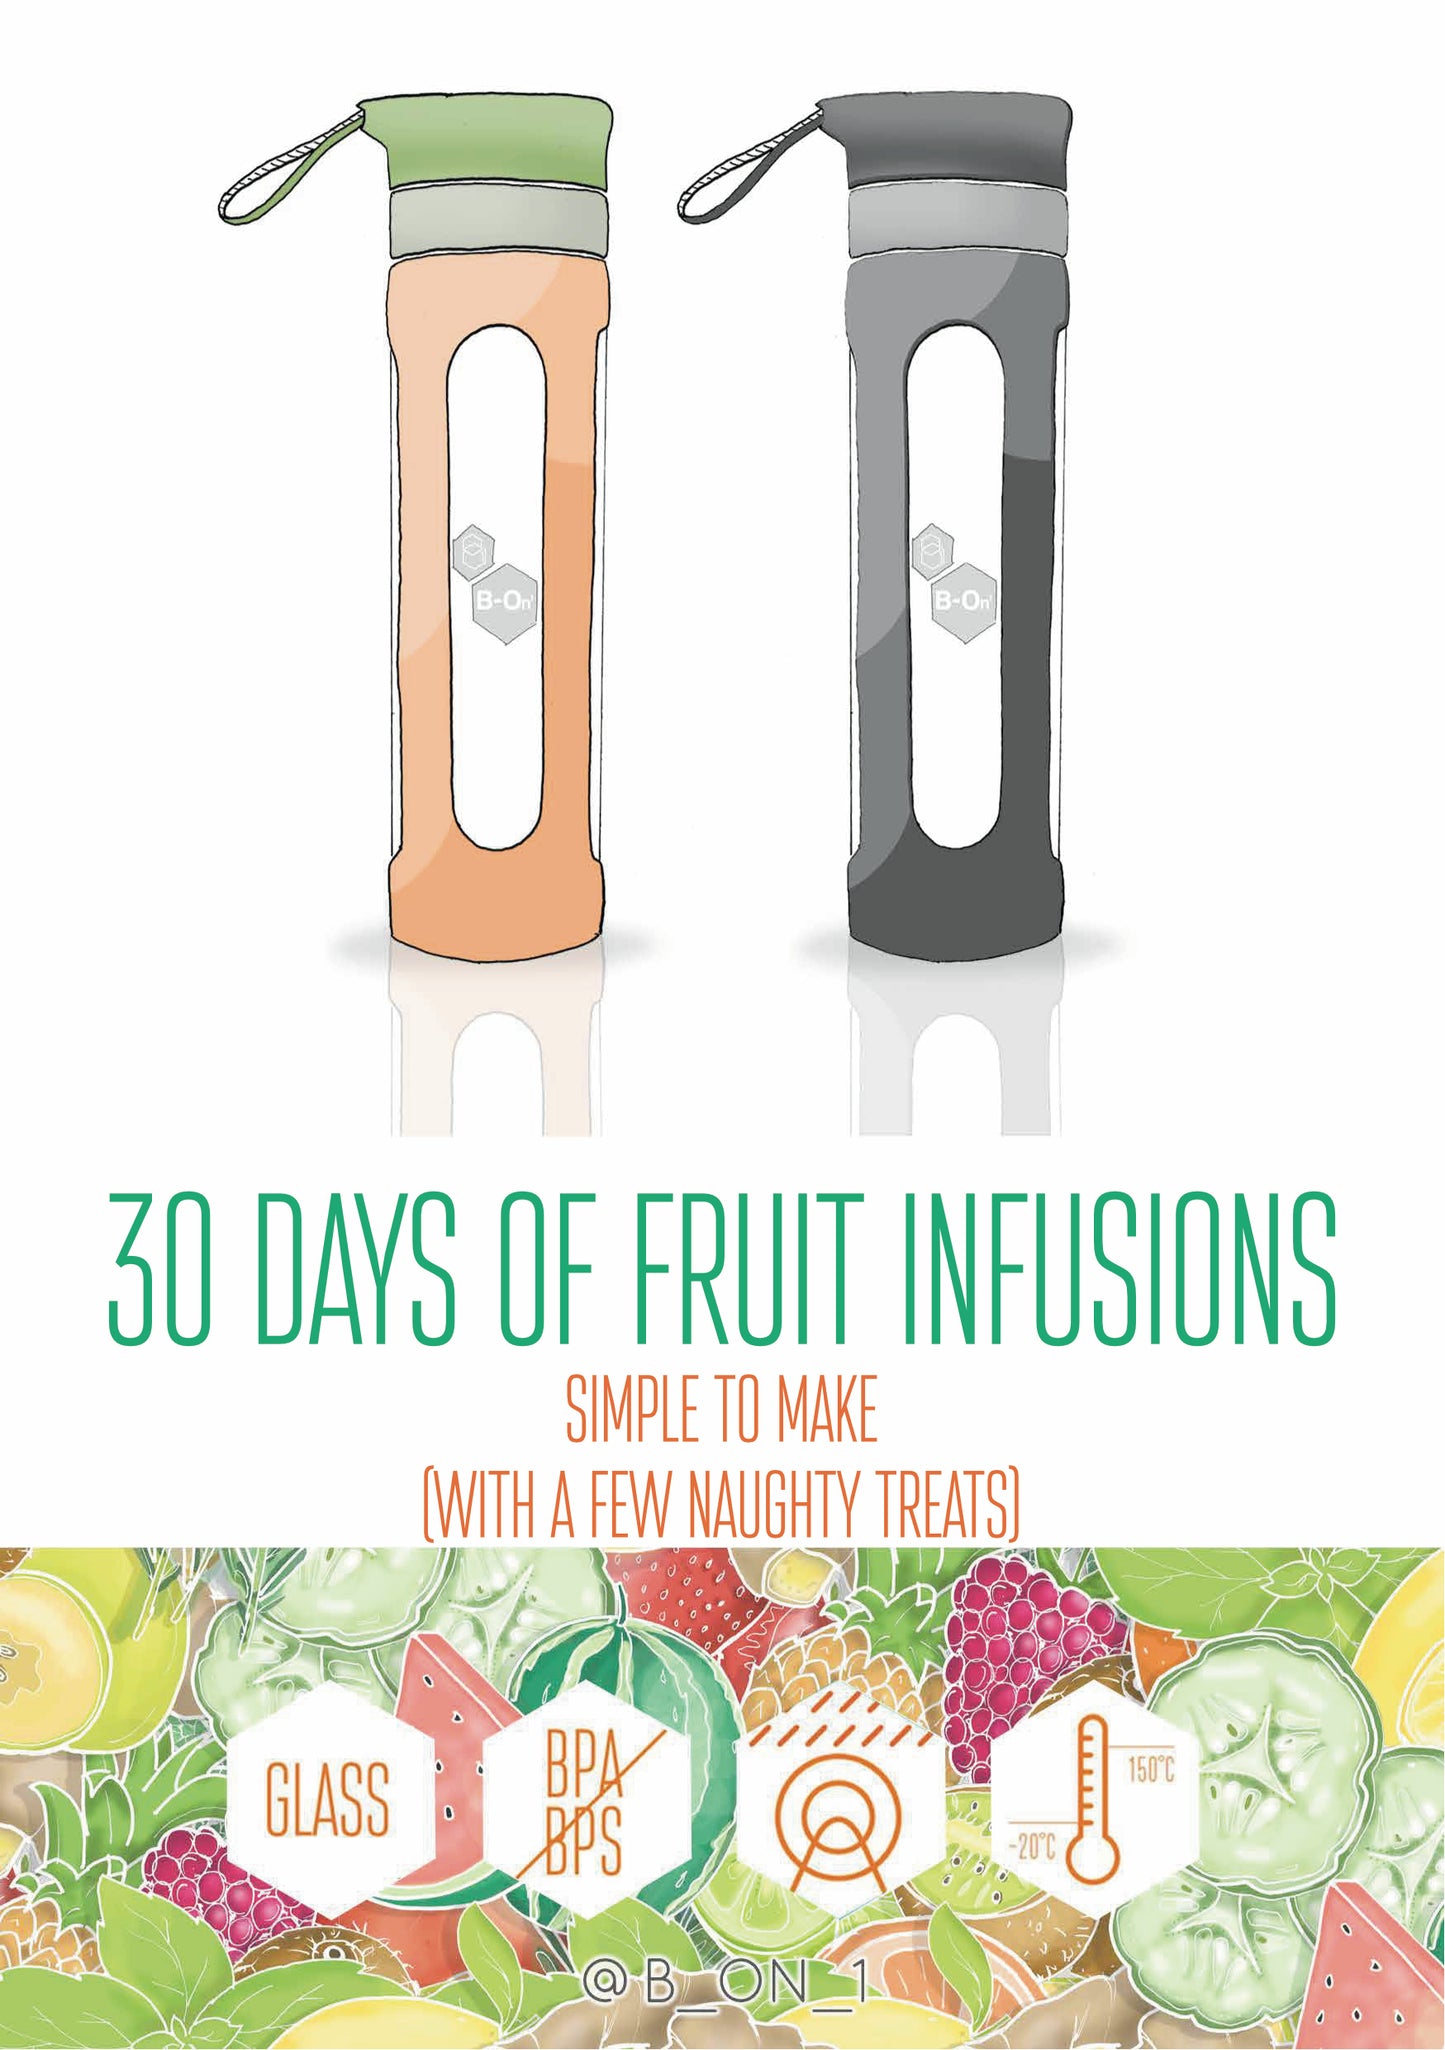 30 Days of Fruit Infusions